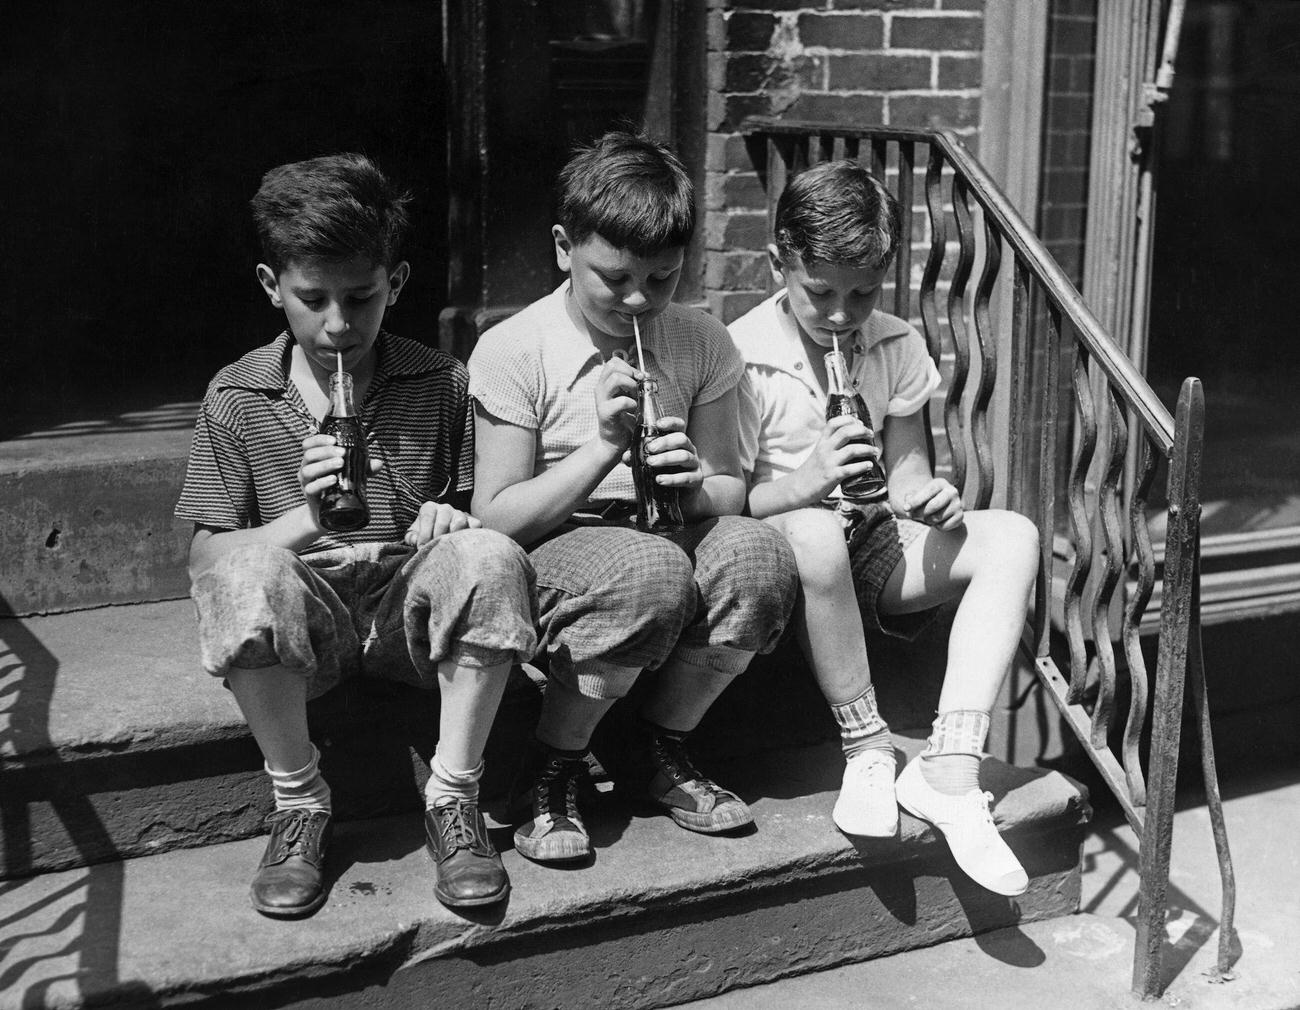 Three young boys cooling off with Coca-Cola on a stoop, undated.